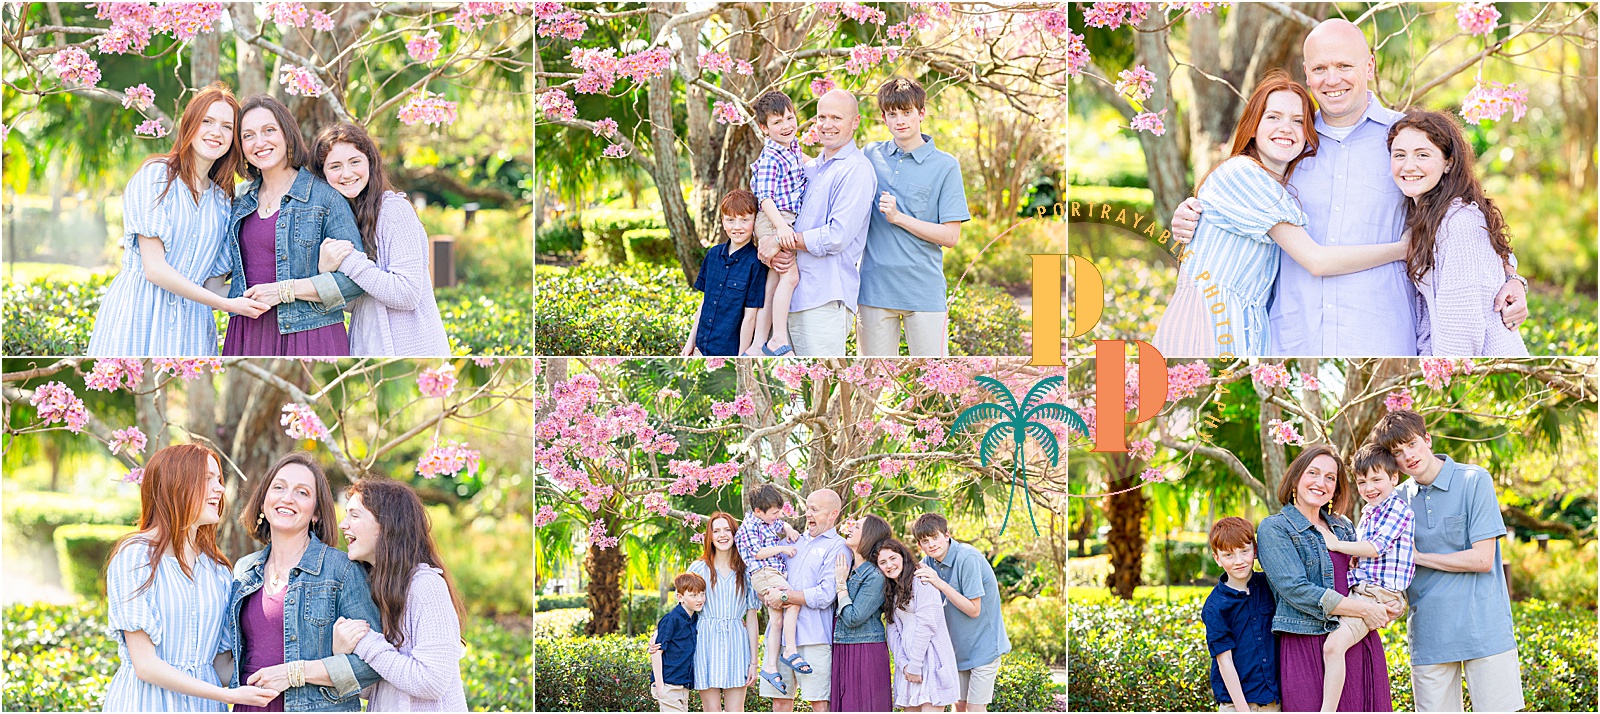 Group family photo in ChampionsGate, professionally taken by a skilled family photographer, capturing the unity and love among family members.